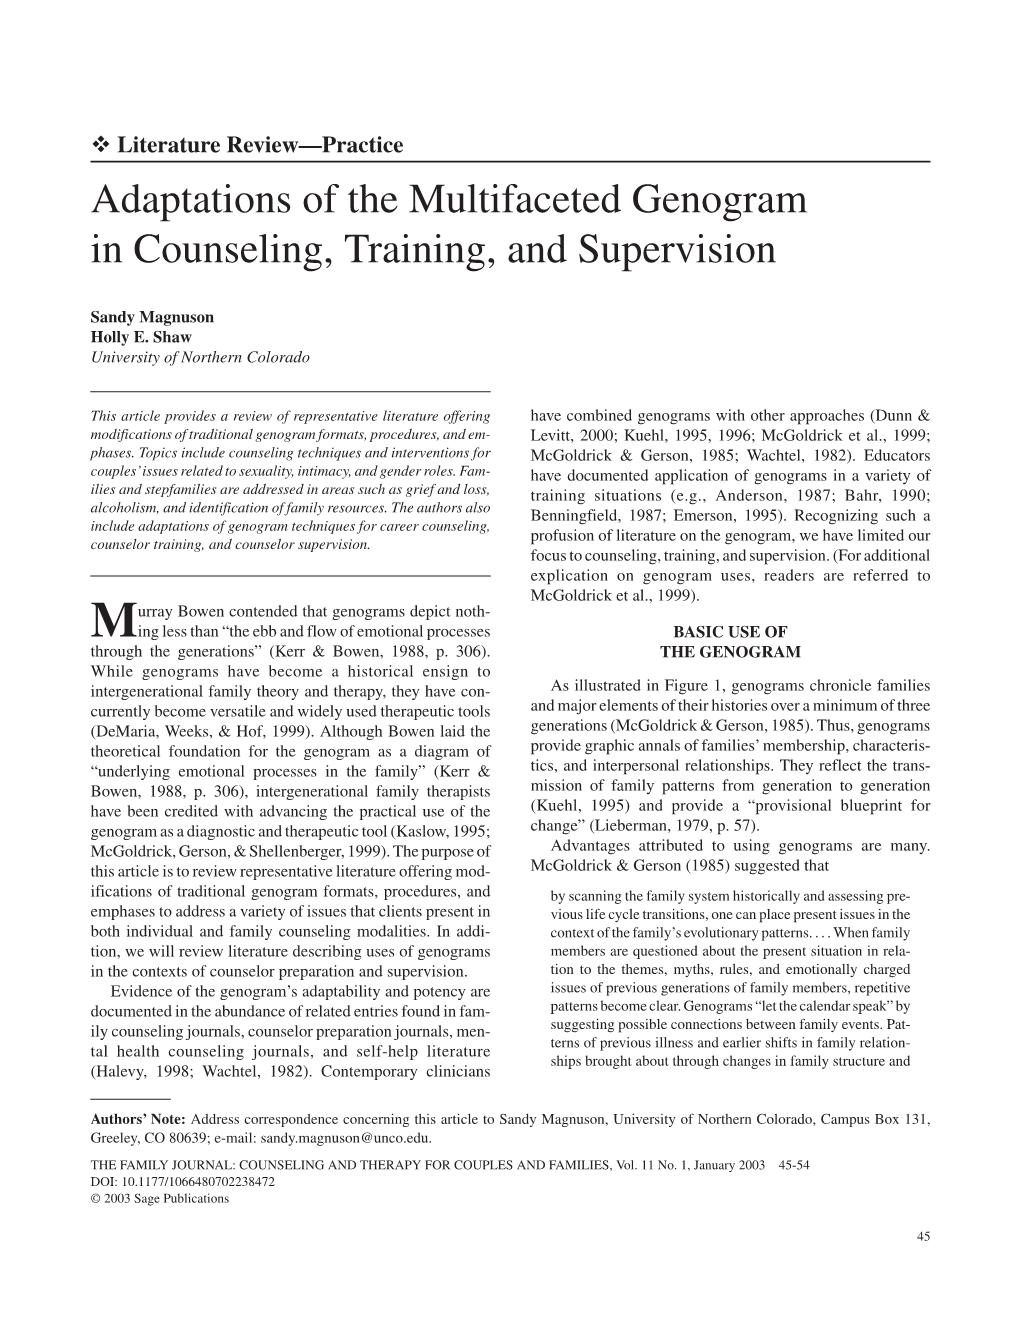 Adaptations of the Multifaceted Genogram in Counseling, Training, and Supervision